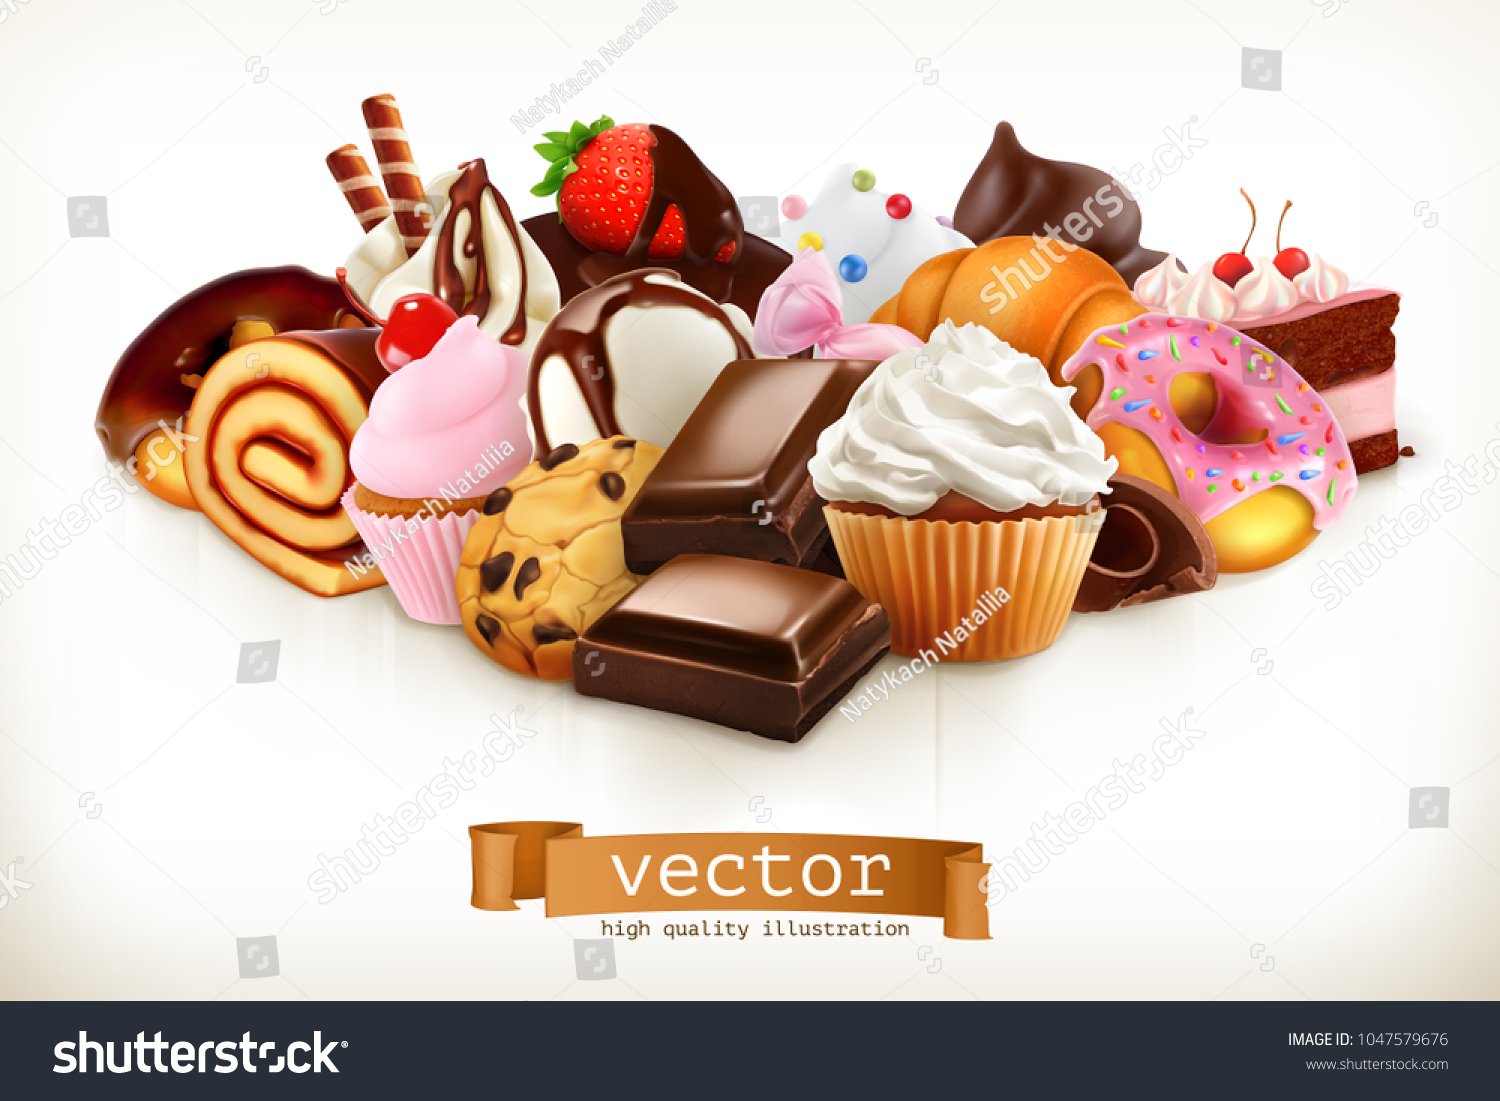 Confectionery. Chocolate, cakes, cupcakes, donuts. 3d realistic vector